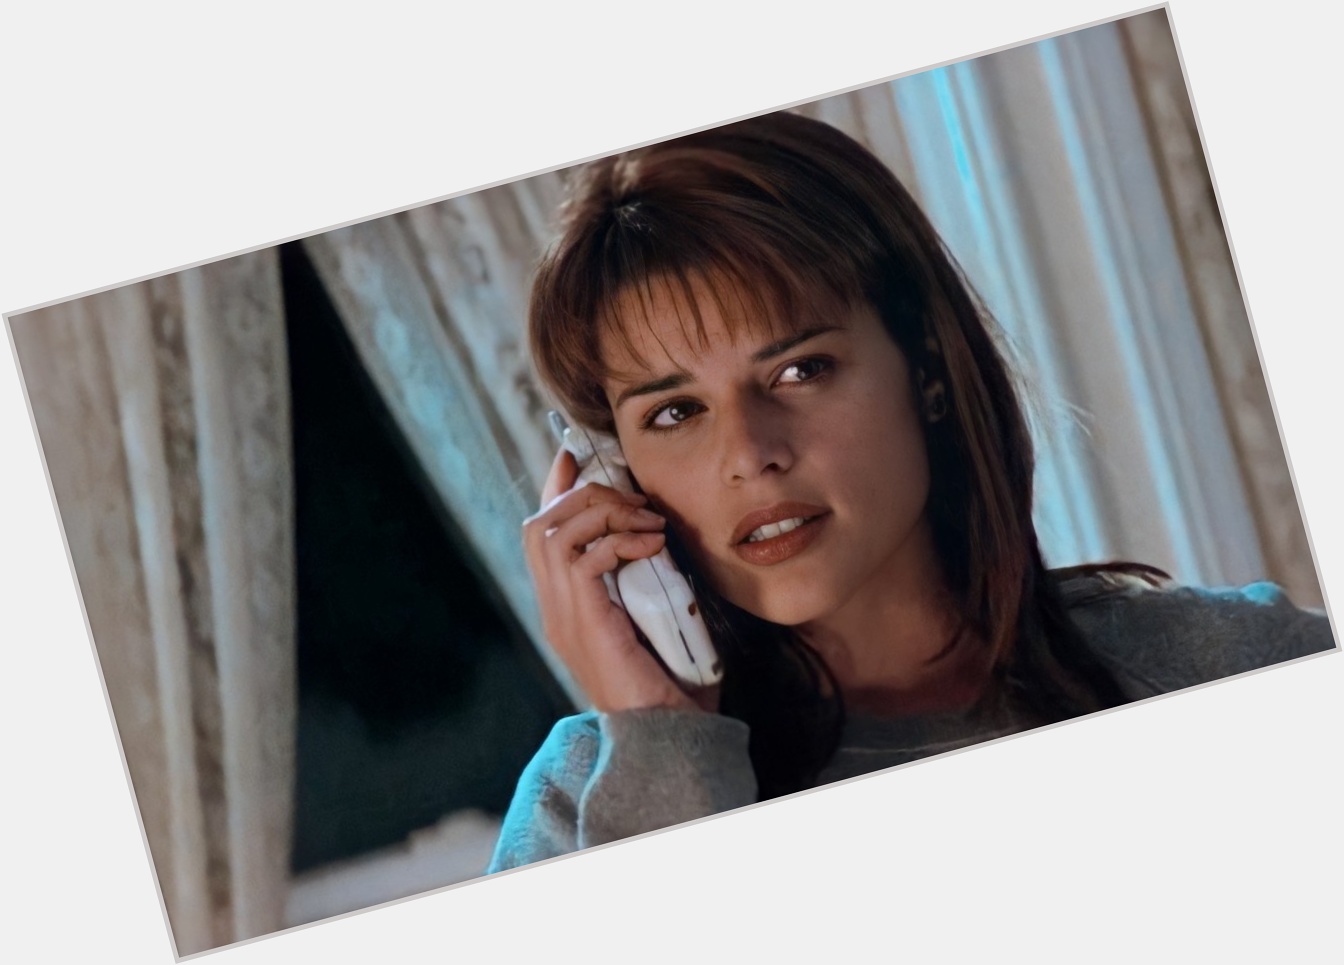 HAPPY BIRTHDAY TO THE BIGGEST FINAL GIRL EVER NEVE CAMPBELL 